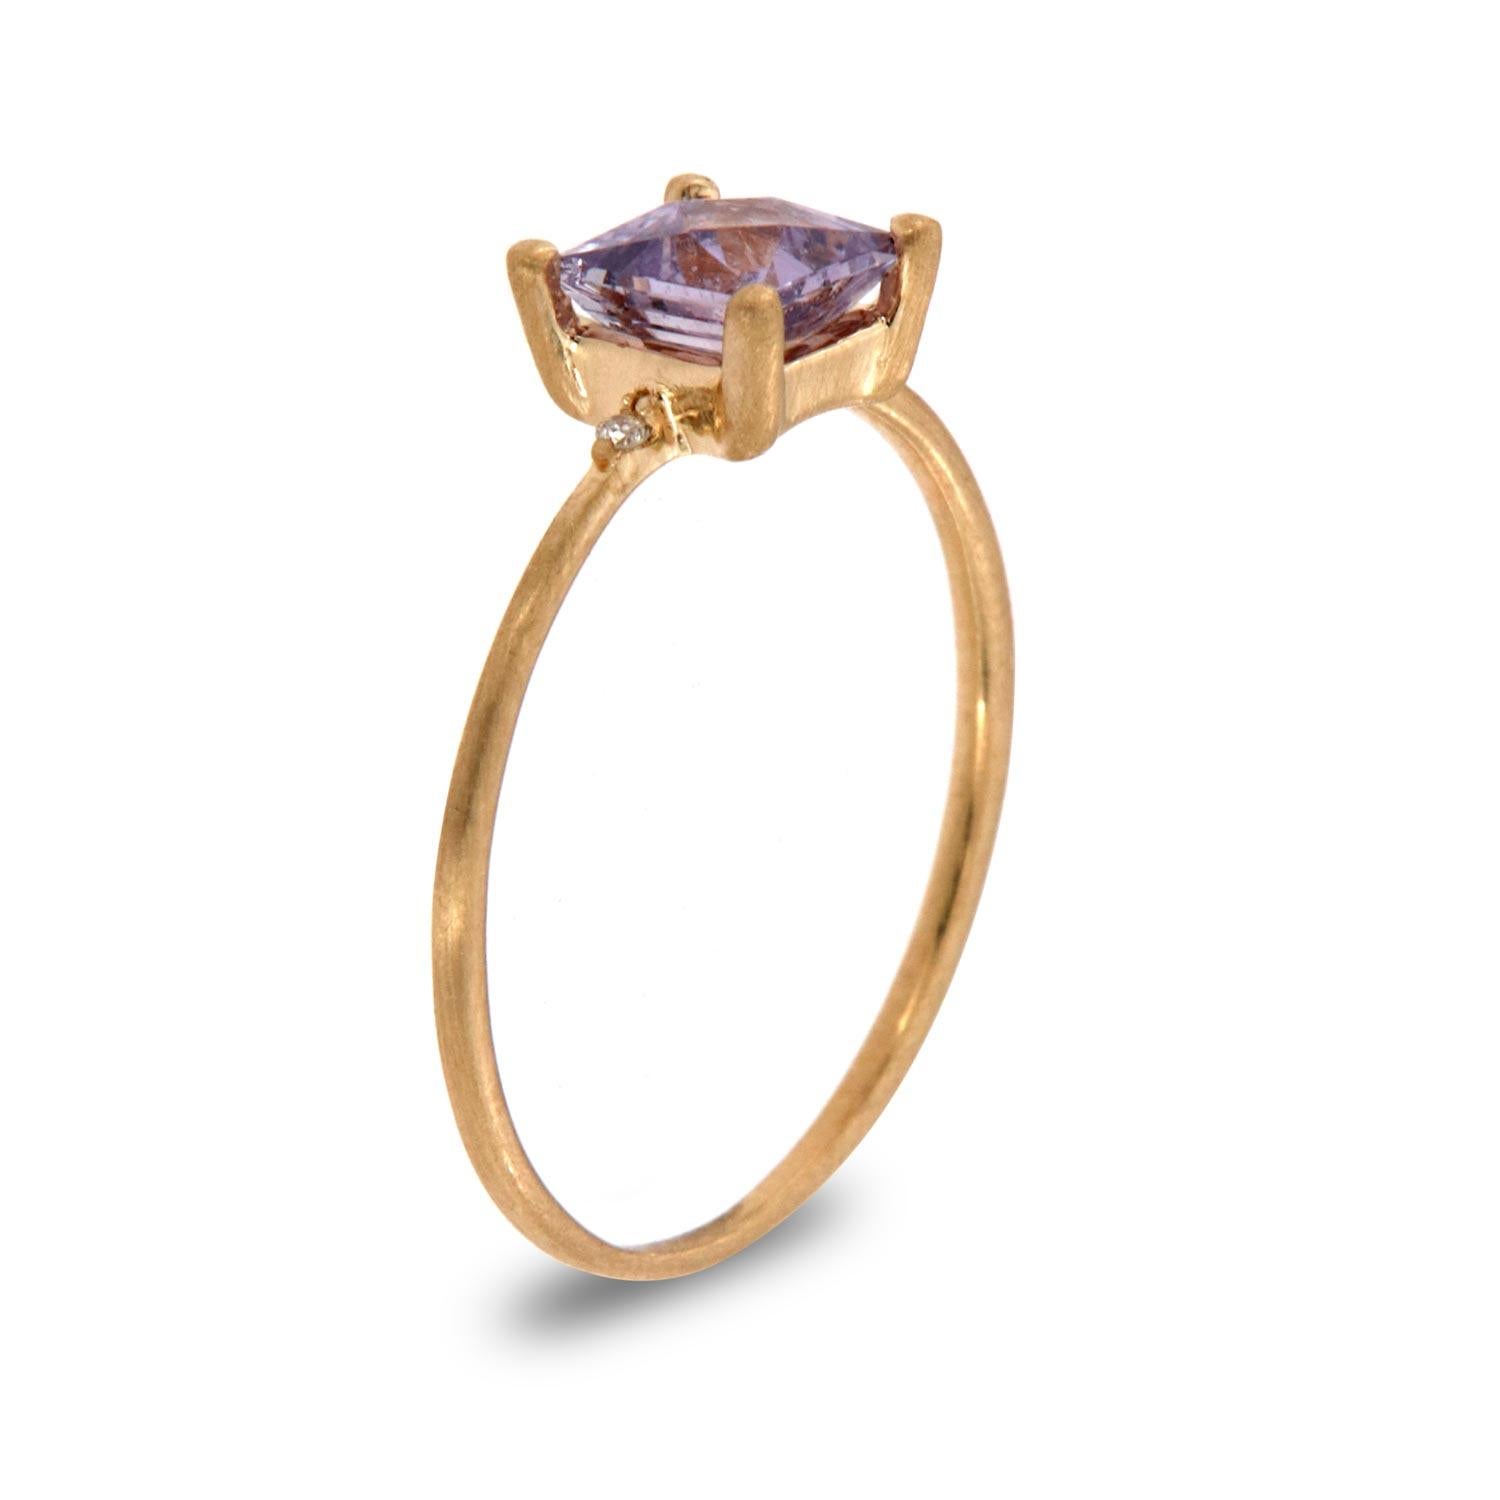 This petite Organic style Rustic ring is impressive in its vintage appeal, featuring a natural lavender french carre sapphire, accented with round brilliant diamonds. Experience the difference in person!

Product details: 

Center Gemstone Type: